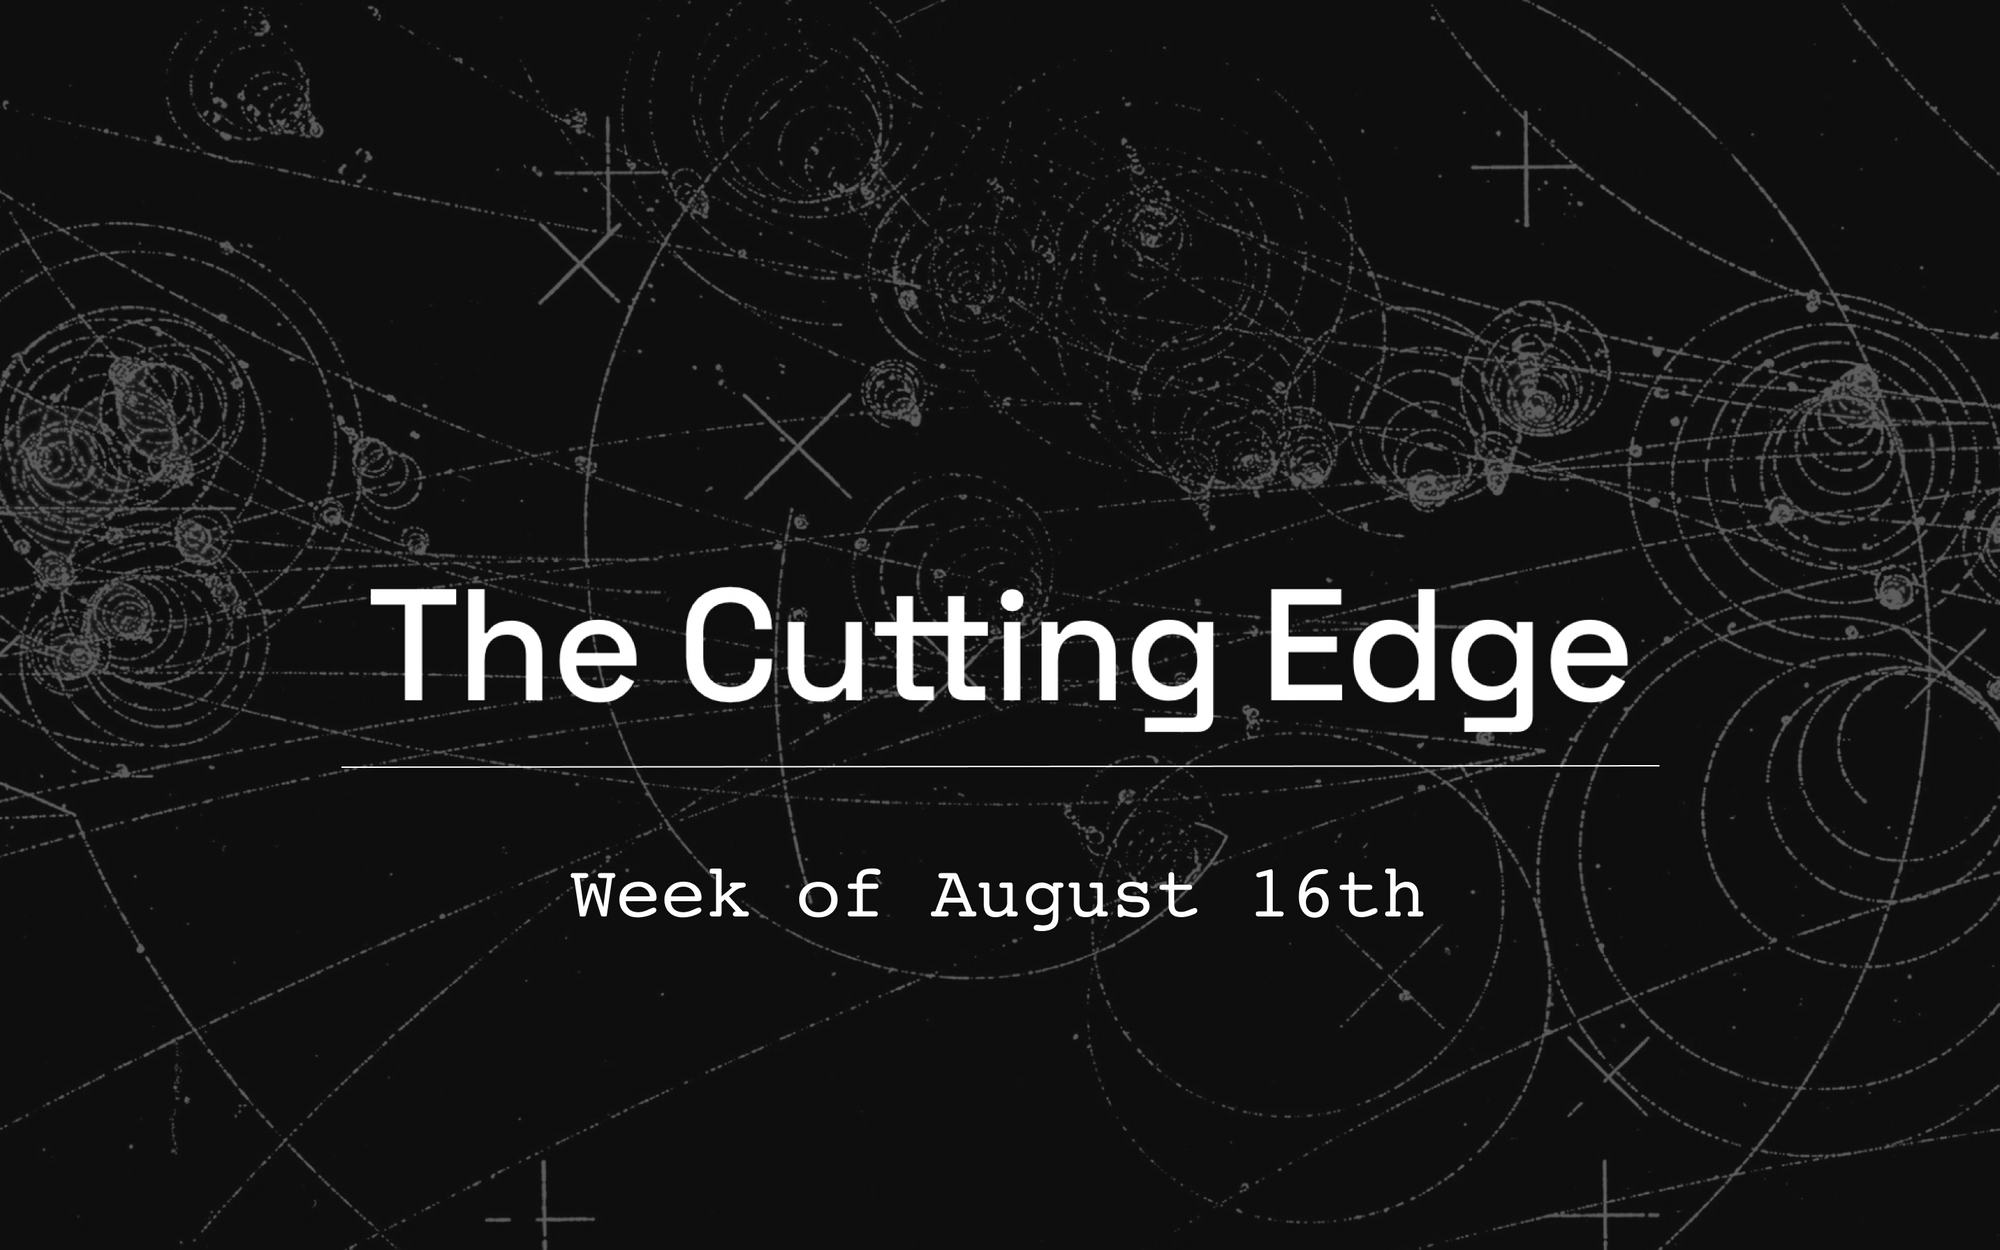 The Cutting Edge: Week of August 16th